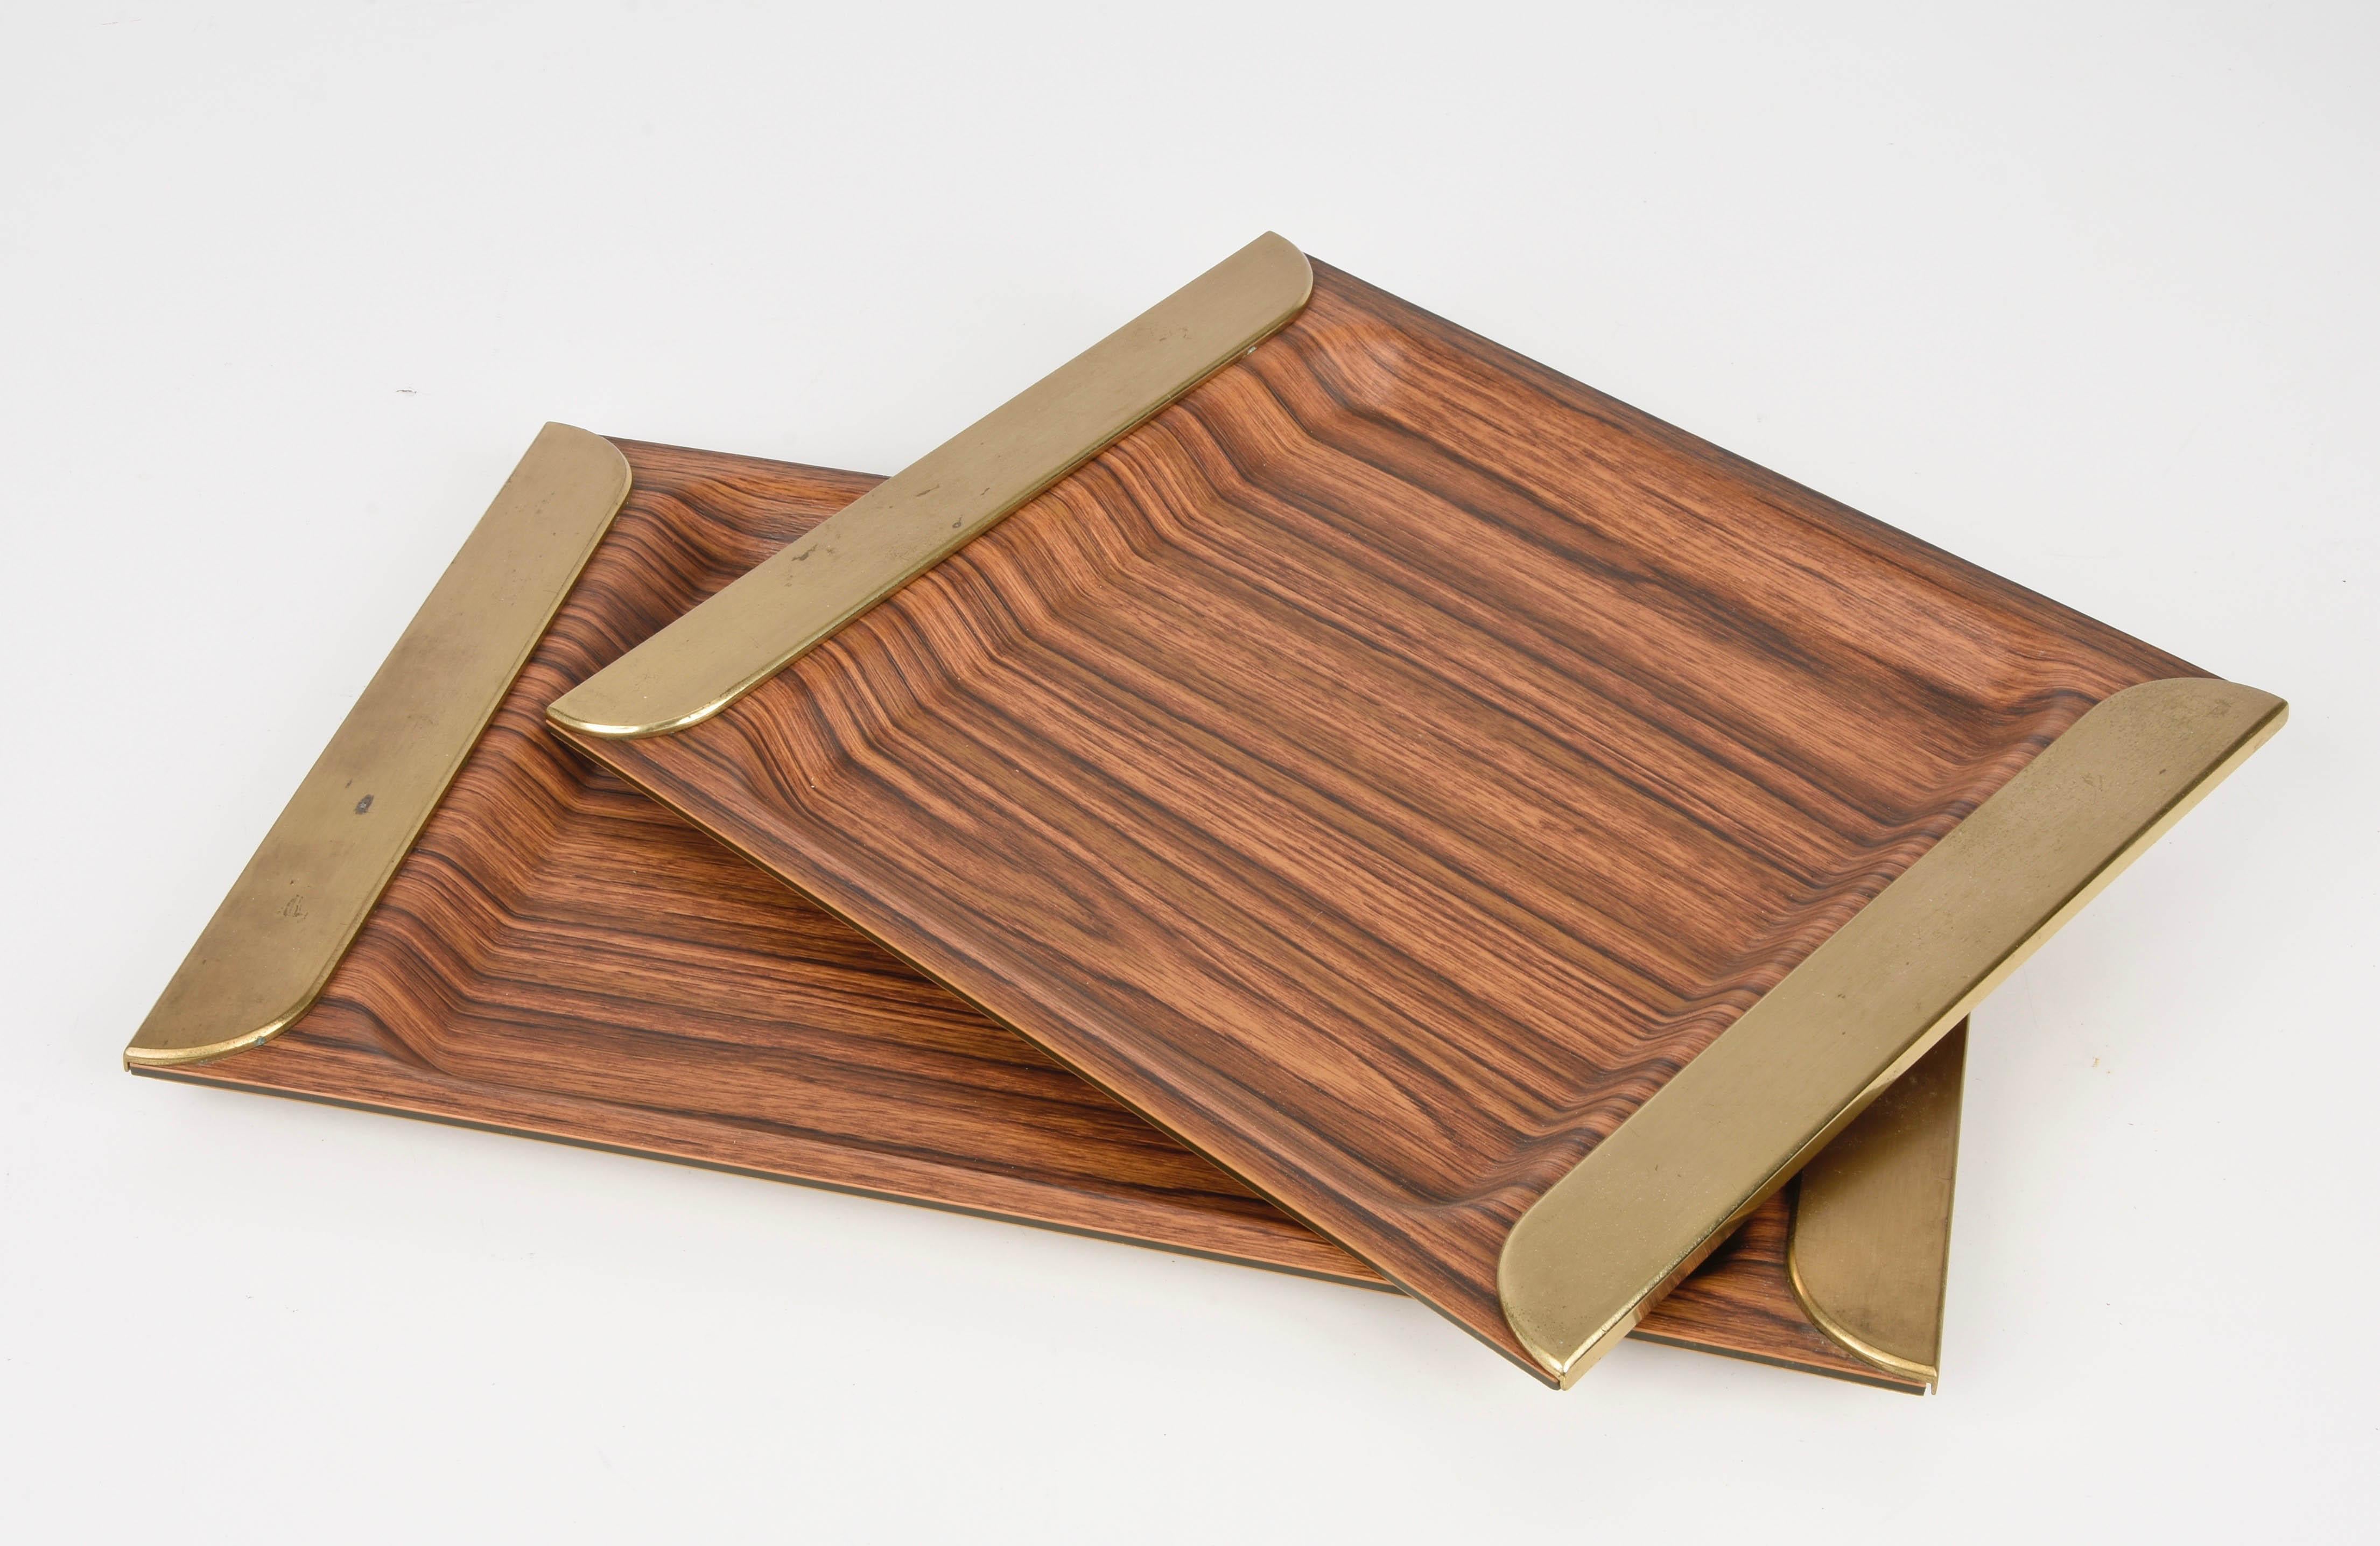  Pair of Midcentury Laminate and Brass Italian Trays Serving Pieces, 1970s For Sale 5